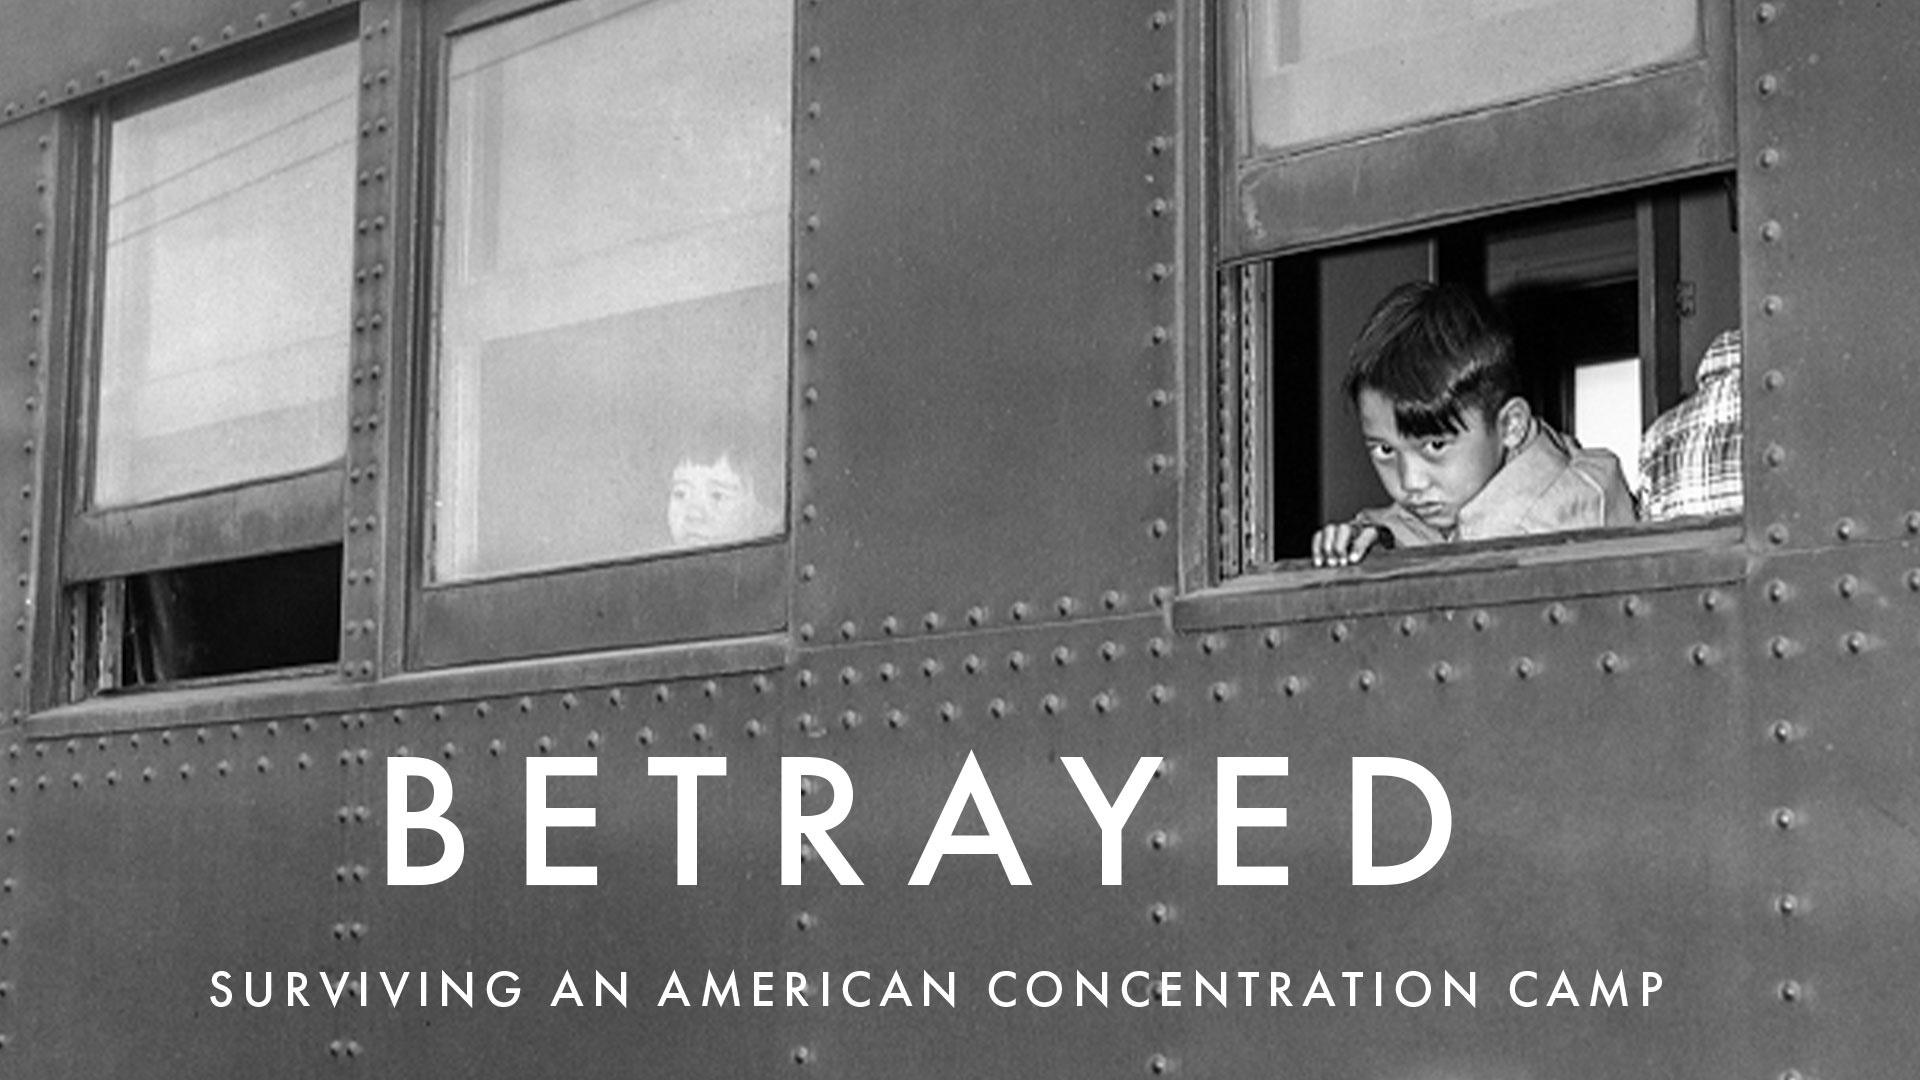 Betrayed: Surviving an American Concentration Camp